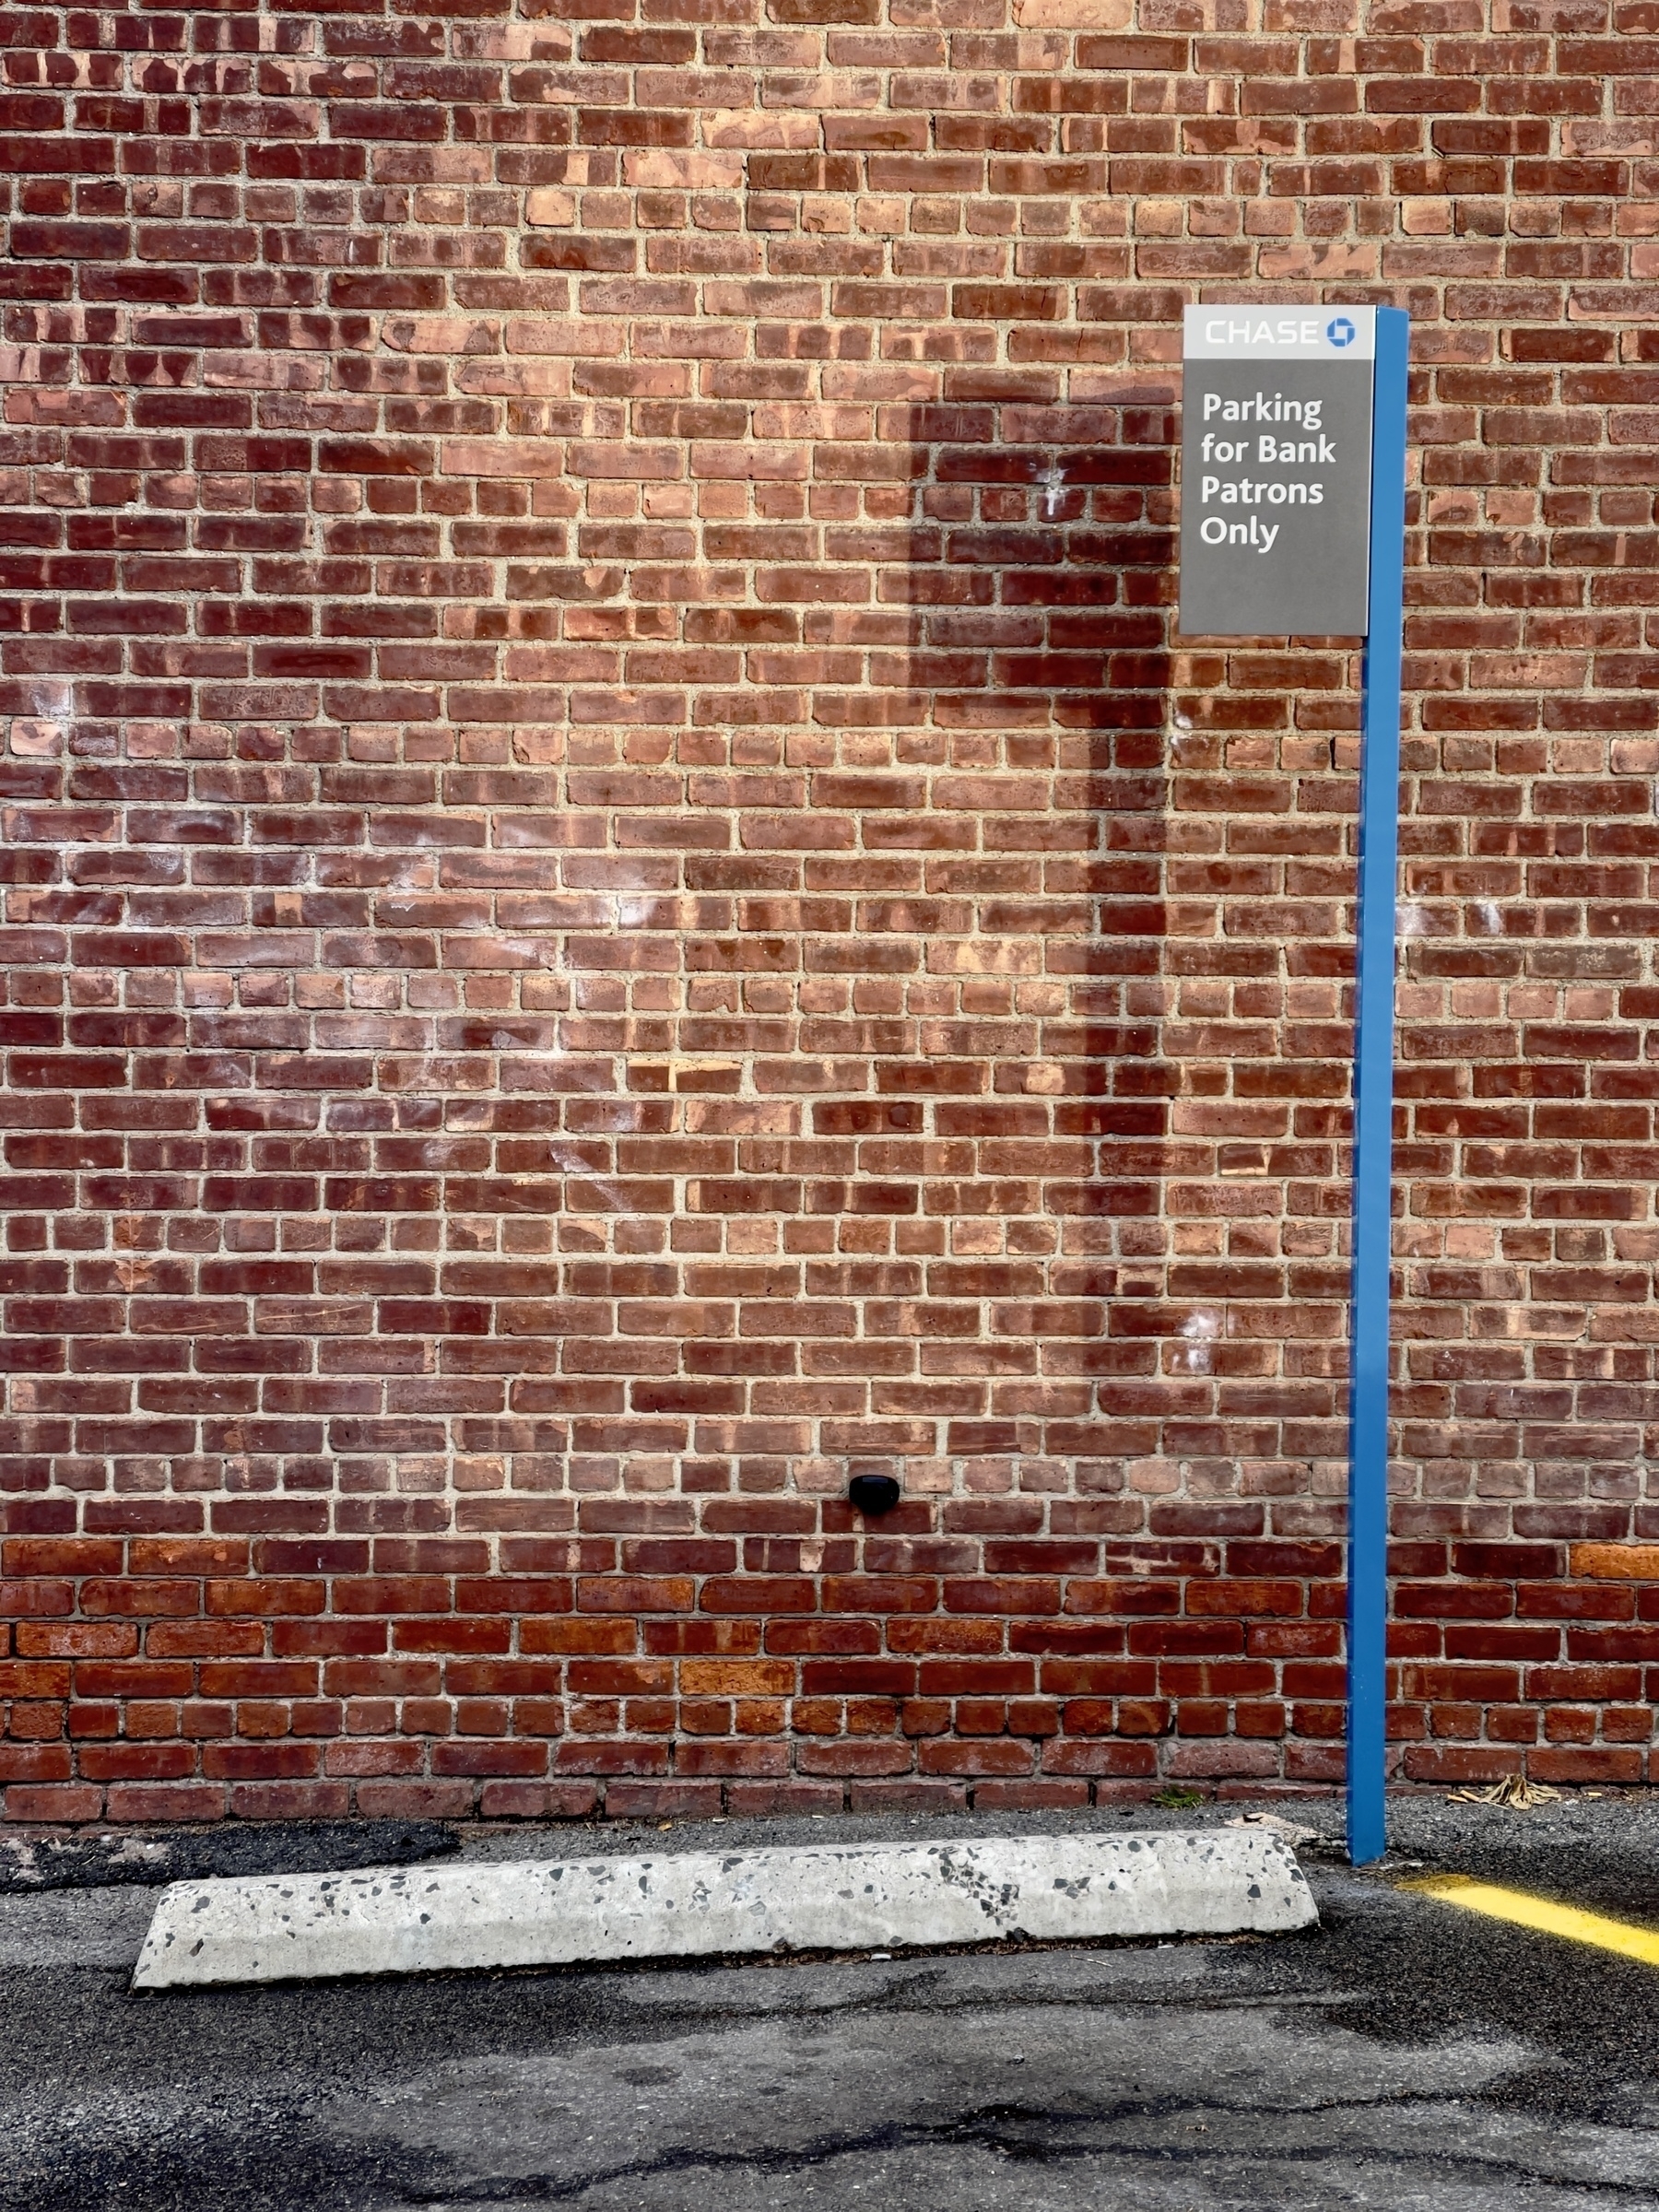 Brick wall, parking bumper, parking for bank patrons only sign.